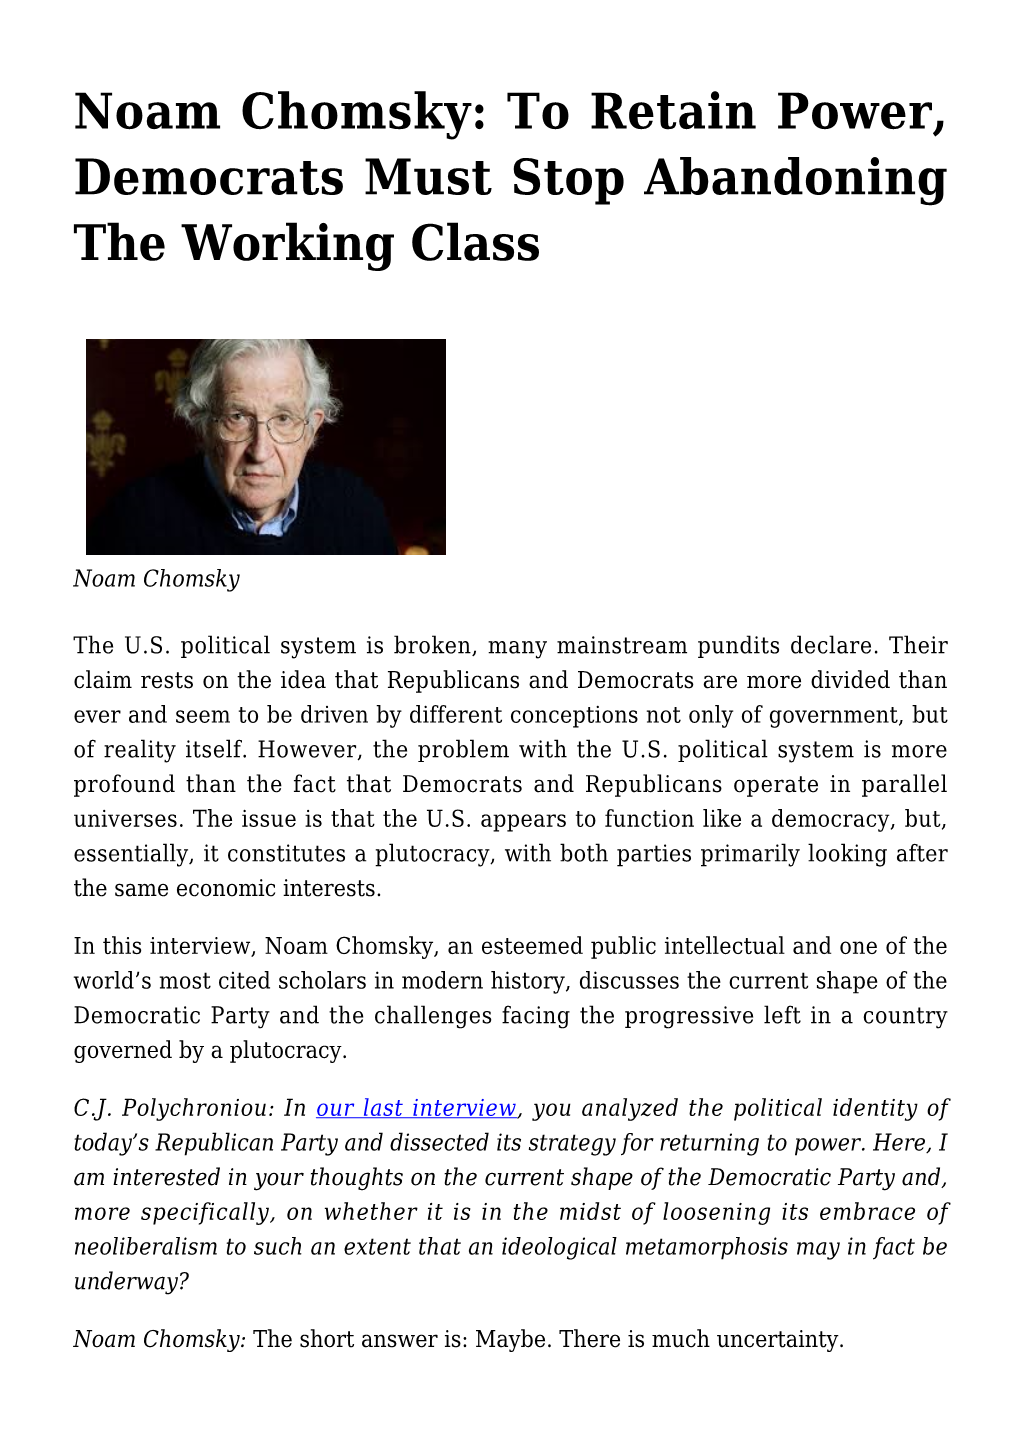 Noam Chomsky: to Retain Power, Democrats Must Stop Abandoning the Working Class